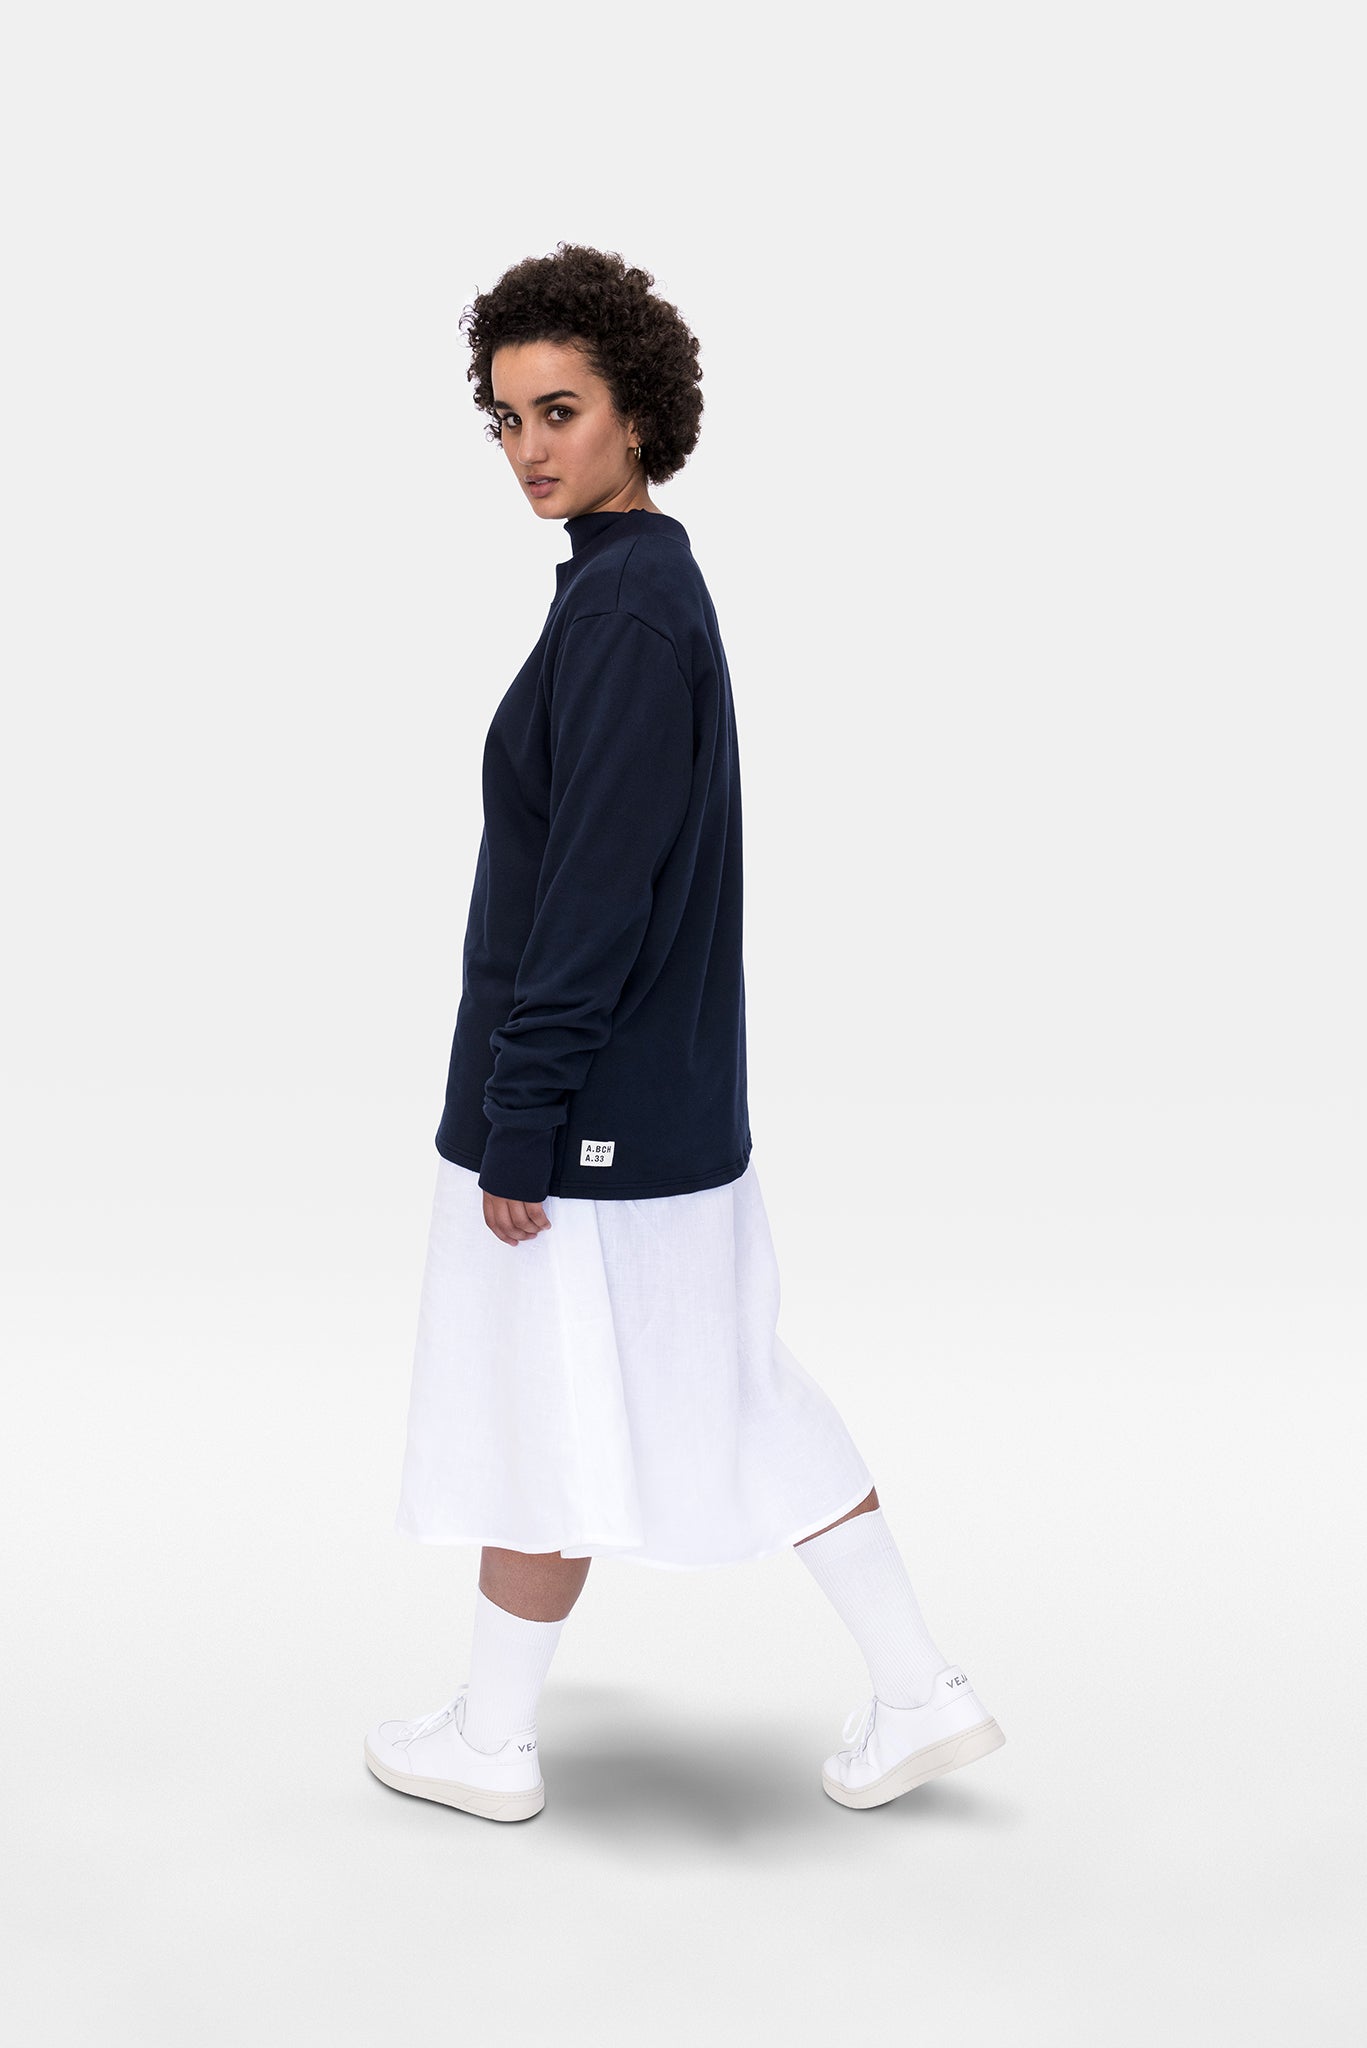 A.BCH A.33 Navy Classic Fleecy Sweater in Organic Cotton 